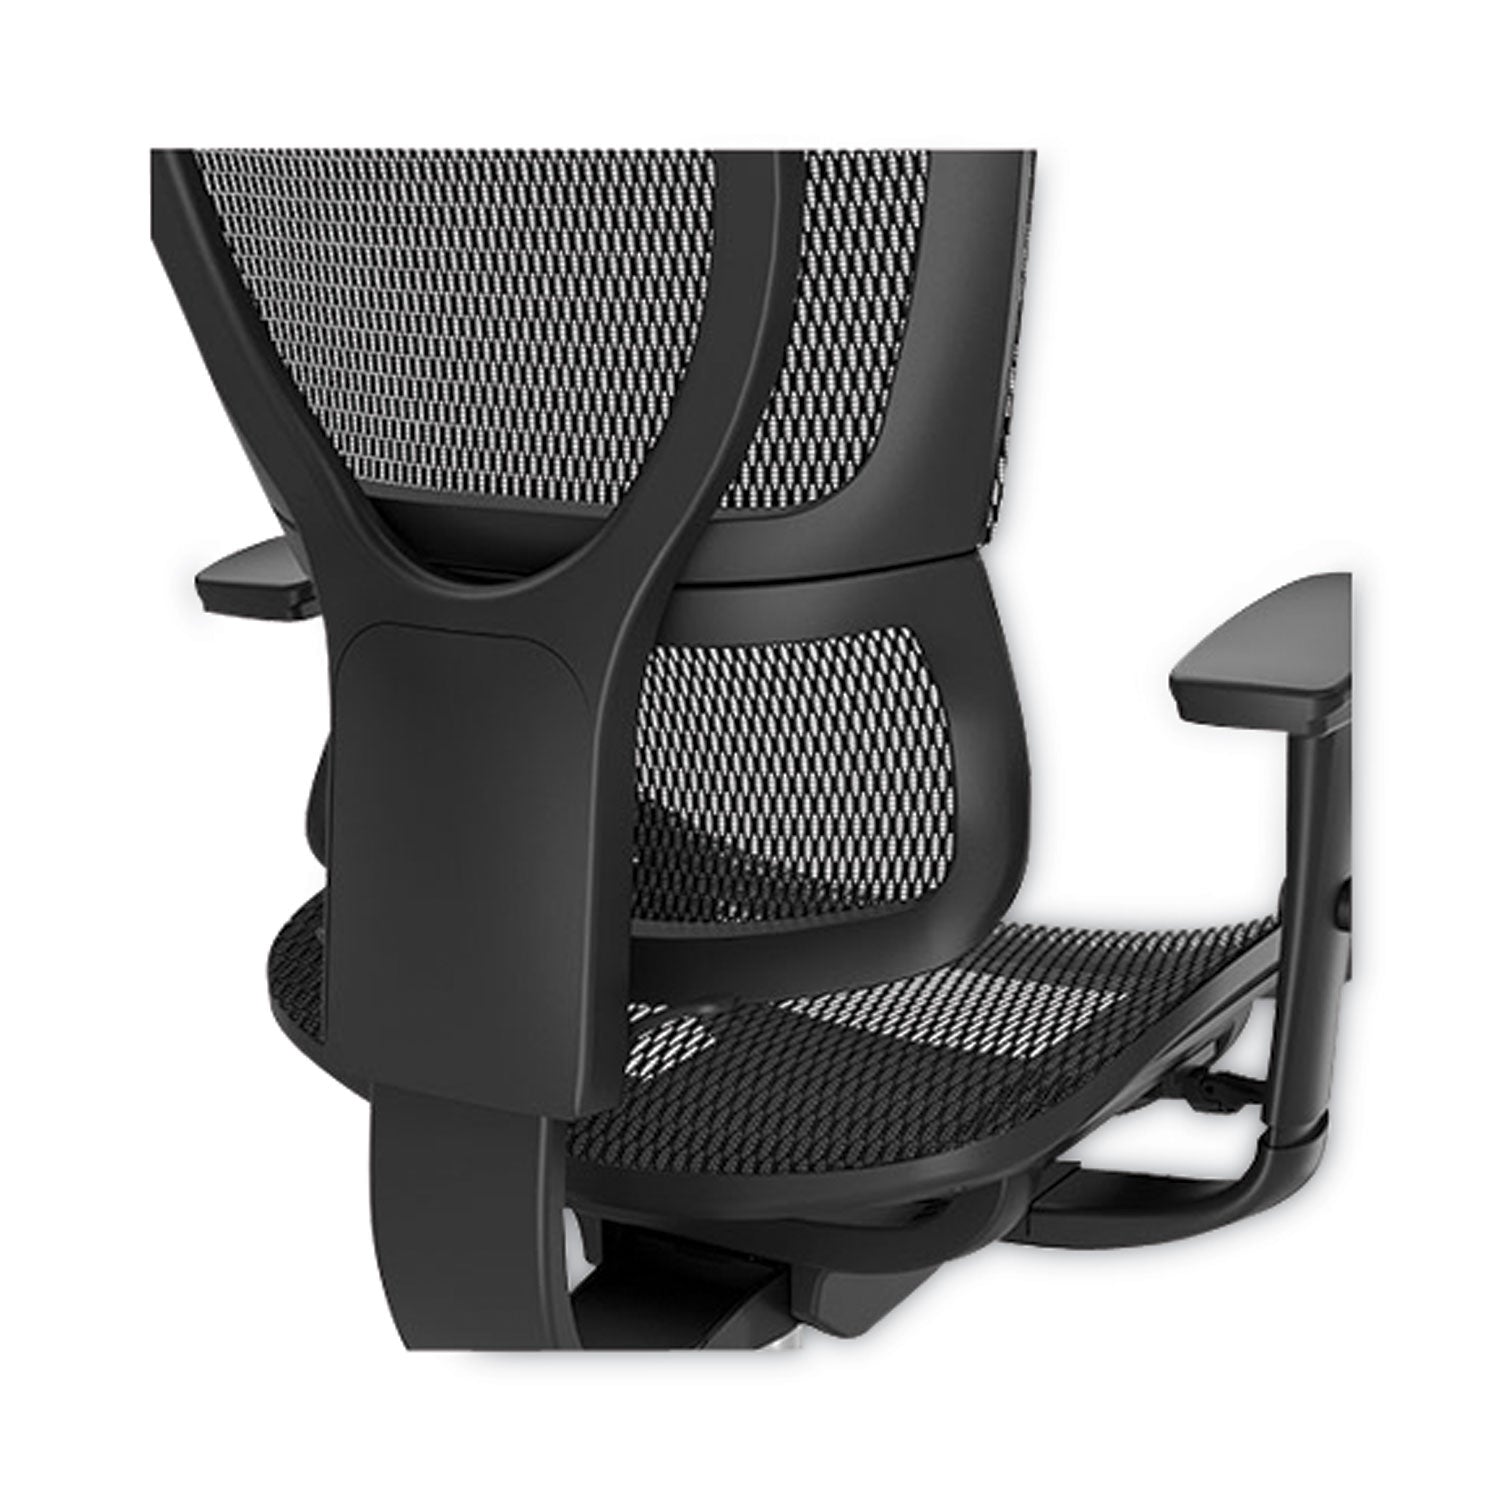 flexfit-1500tm-mesh-task-chair-suppports-up-to-300-lbs167-to-2026-seat-height-black-seat-black-back-black-base_uos28570cc - 5